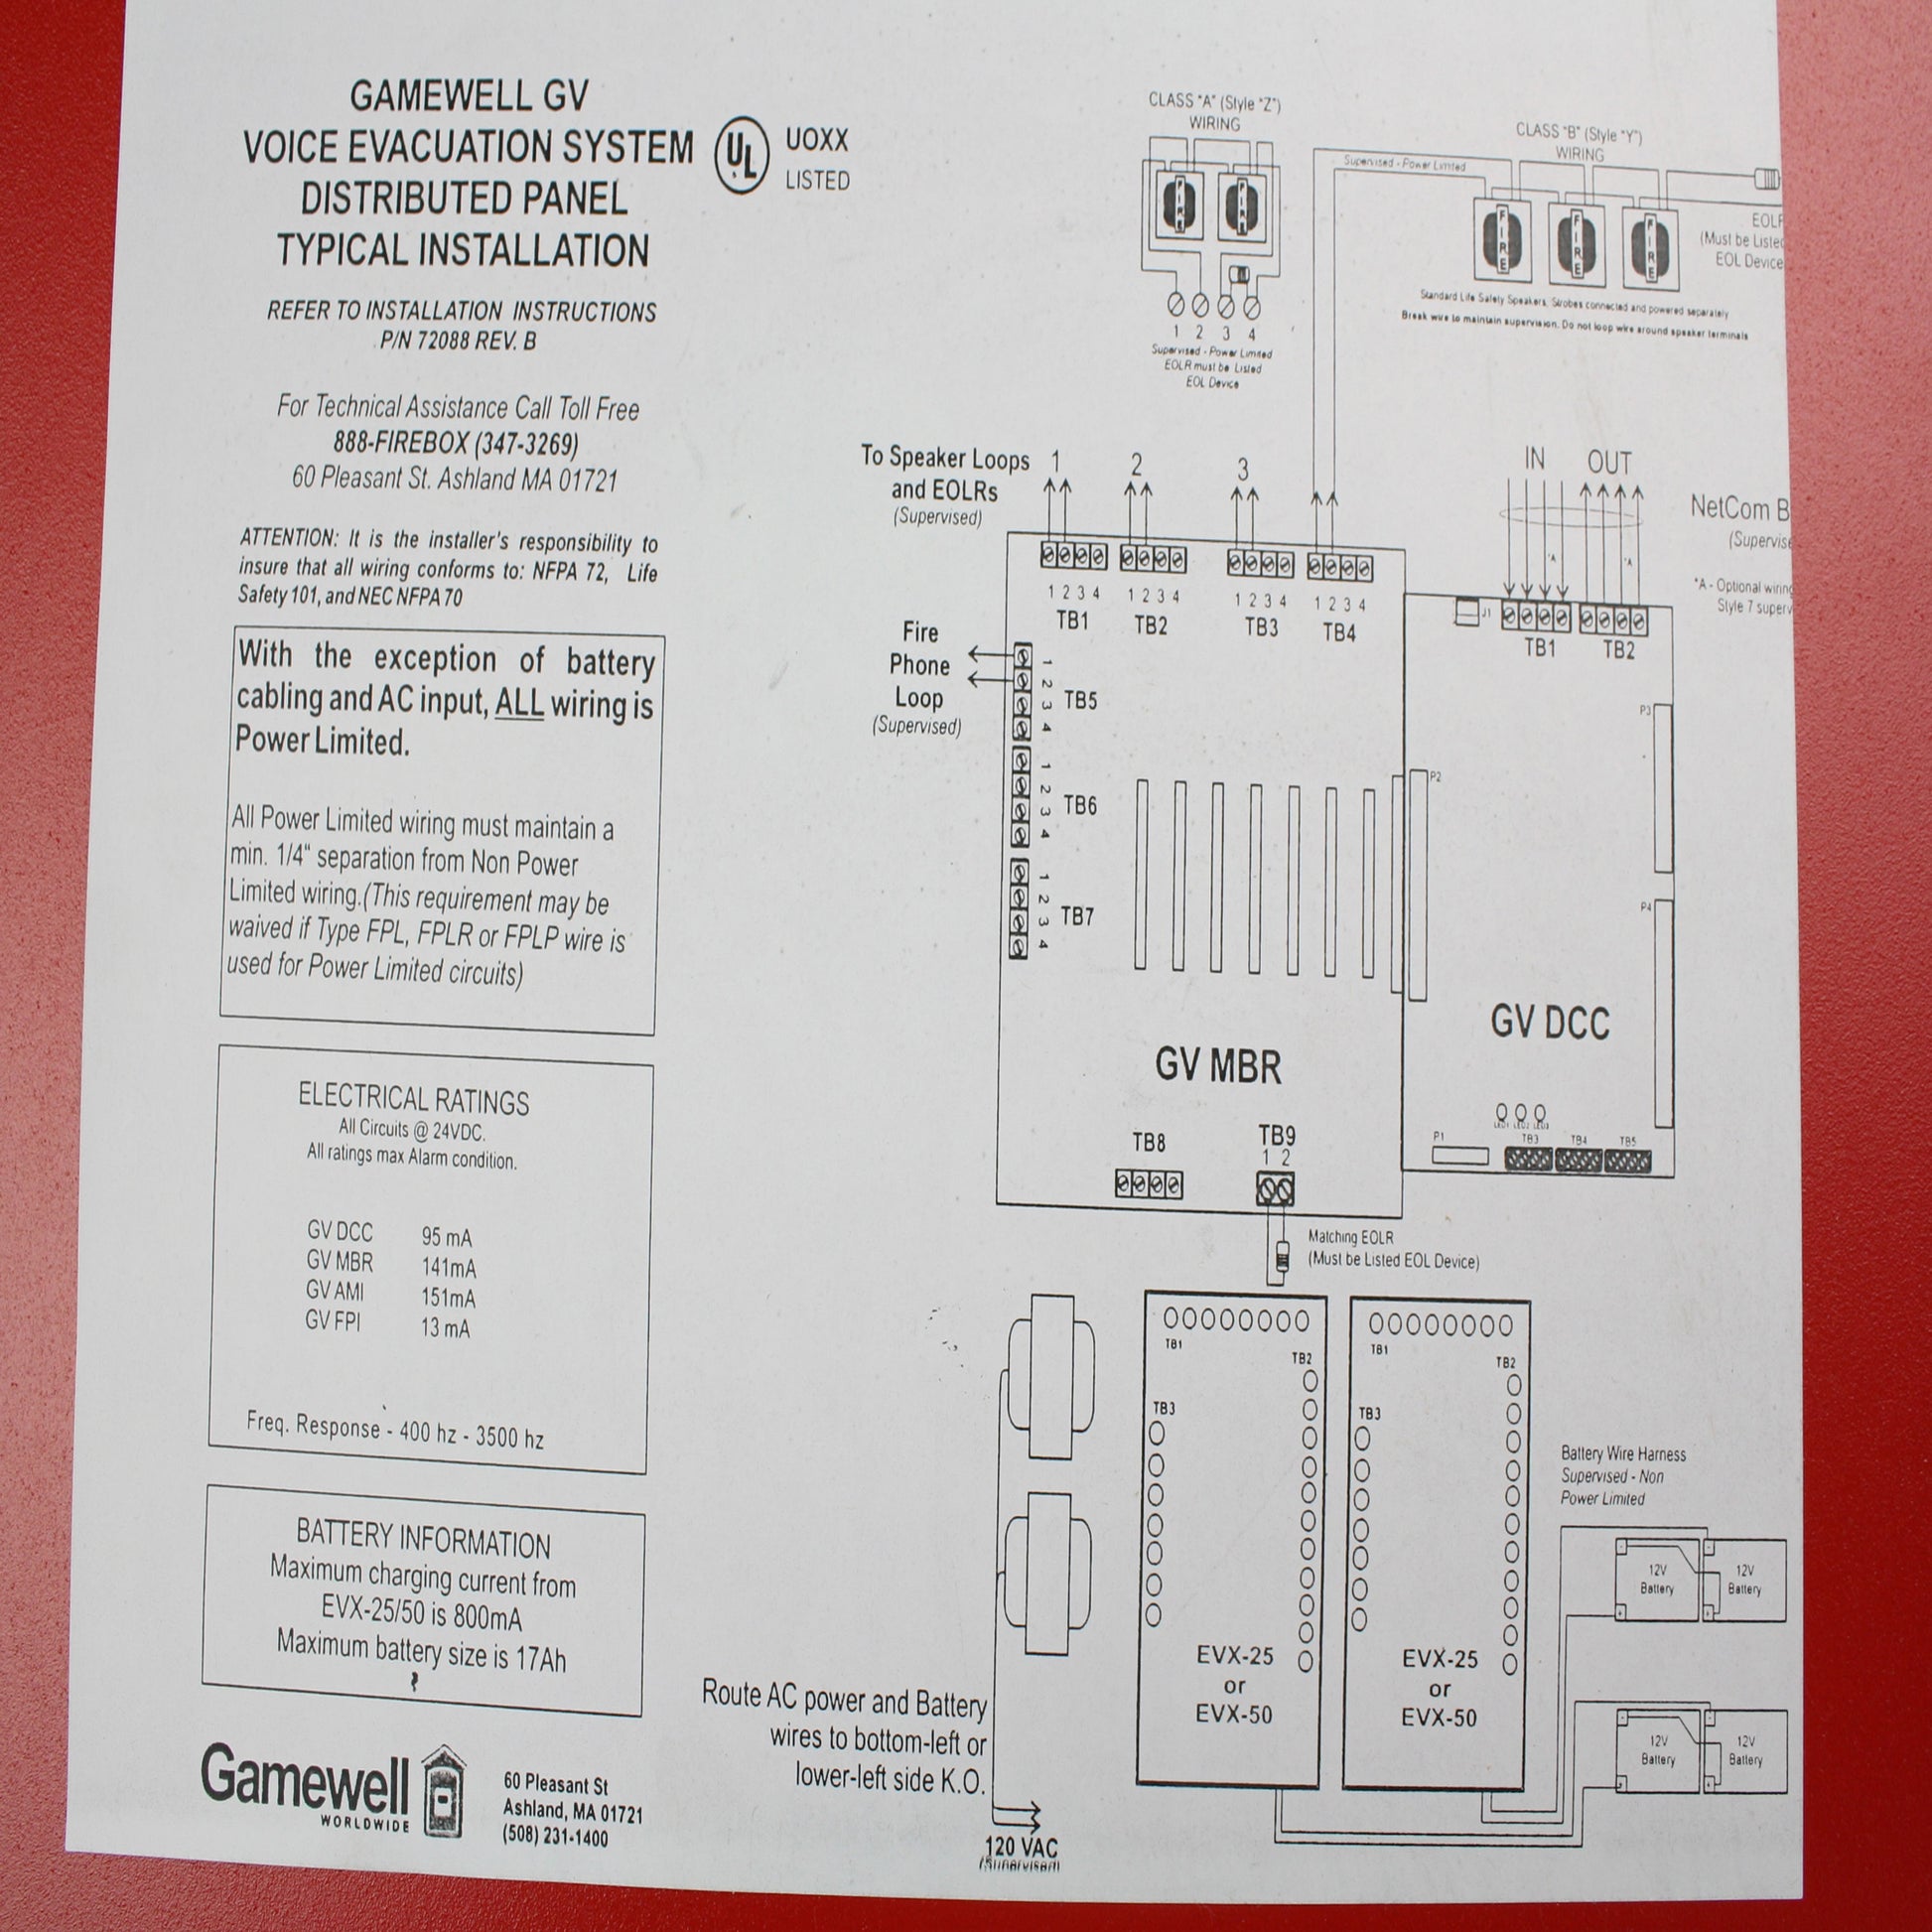 Gamewell-FCI GV-DP